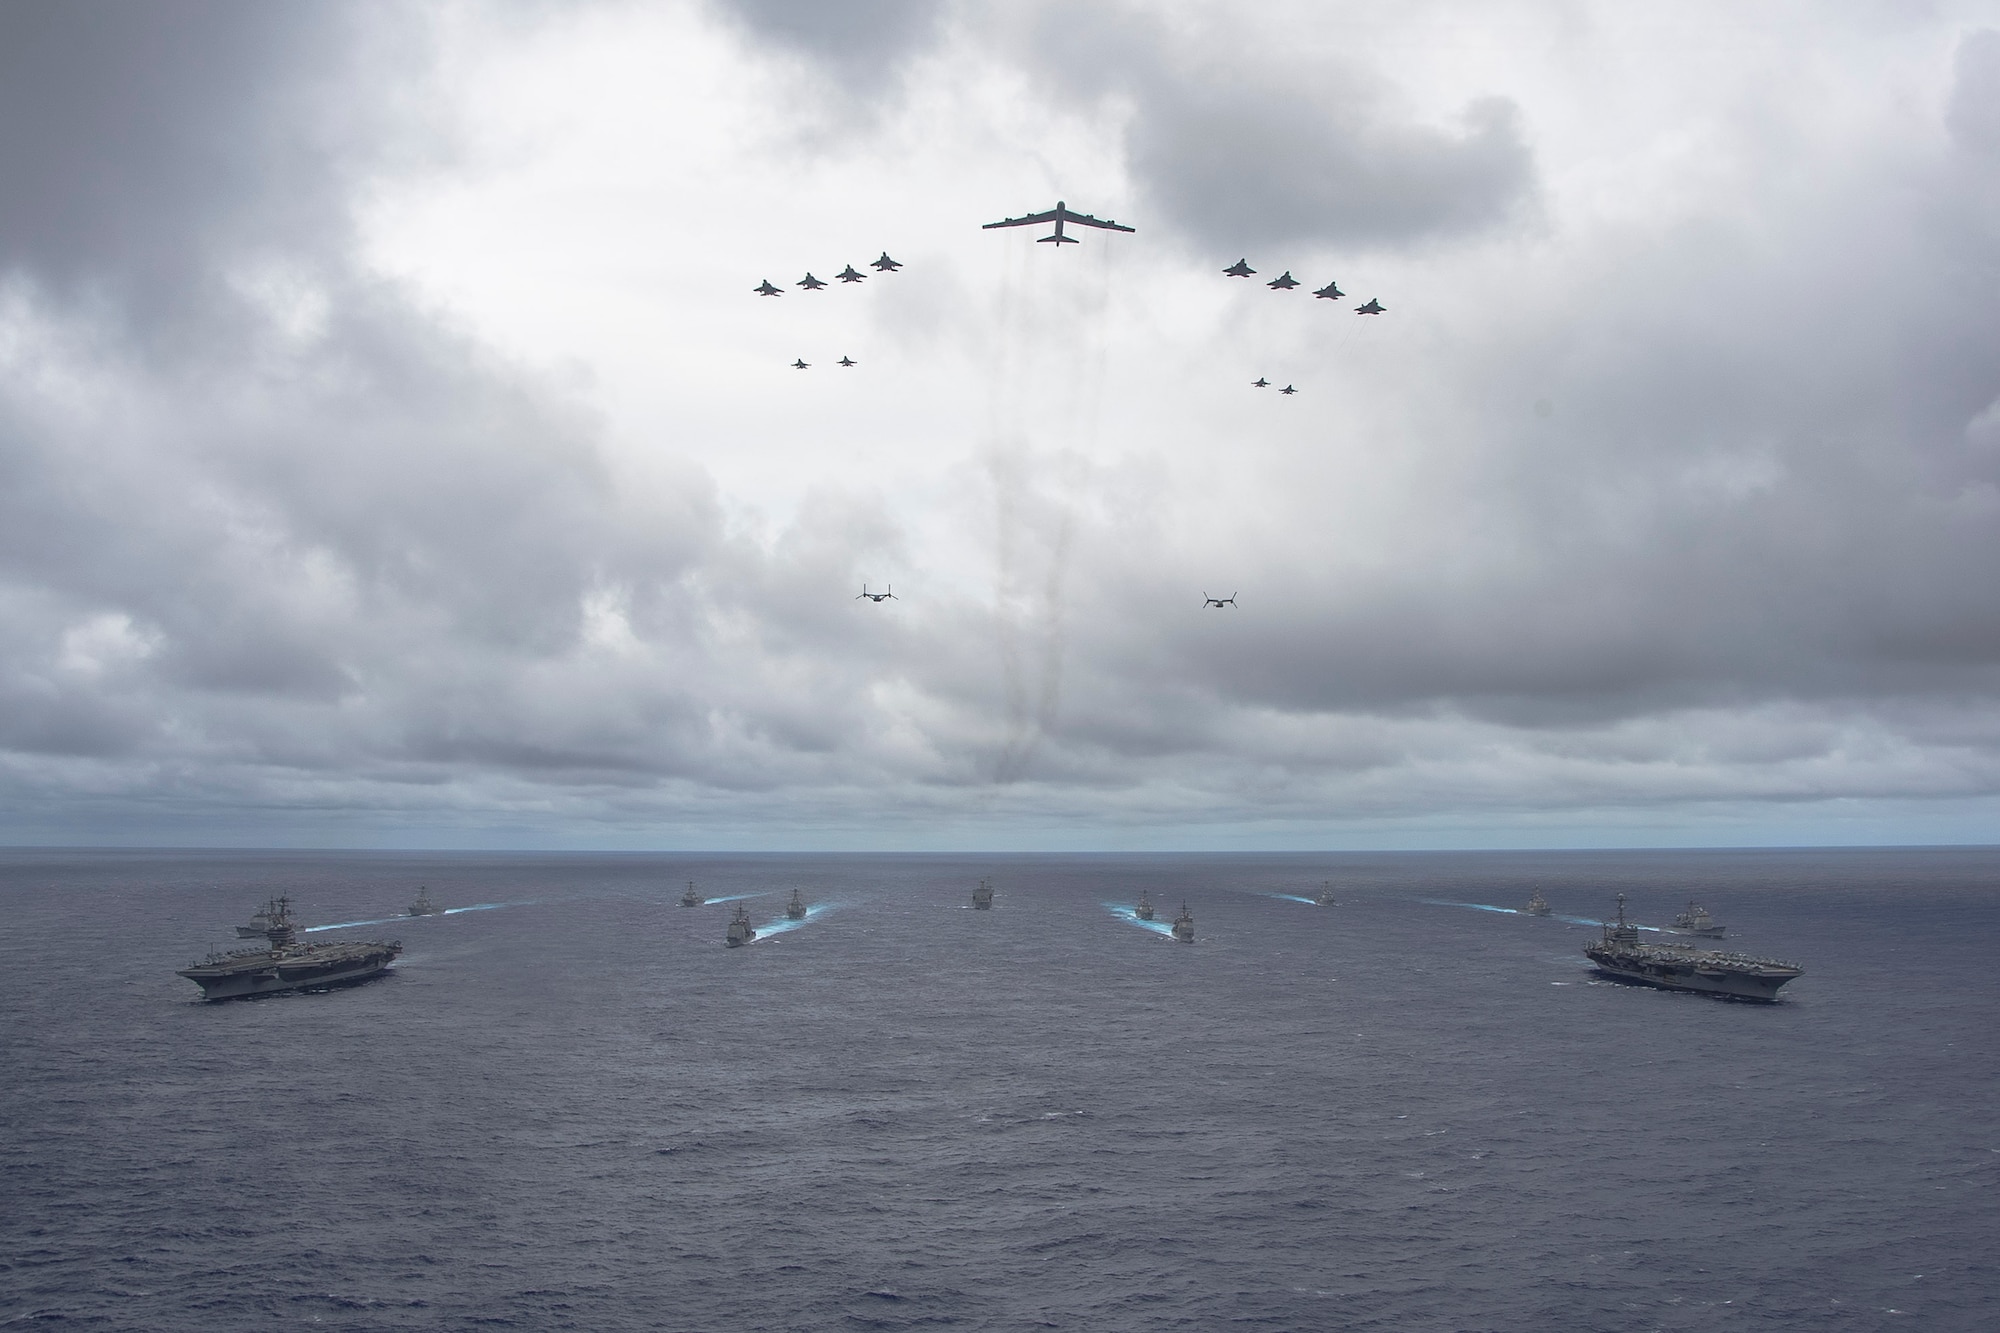 U.S. Navy ships from the George Washington and Carl Vinson Carrier Strike Groups and U.S. Air Force and Marine Corps aircraft operate in formation at the conclusion of Exercise Valiant Shield 2014, Sept. 23. Exercises like VS 14 provide the U.S. military the opportunity to integrate joint assets in an Air-Sea Battle environment, refining the military’s ability to defend U.S. interests and those of its allies and partners in the Pacific region. (U.S. Navy photo by Mass Communication Specialist 1st Class Trevor Welsh/Released)